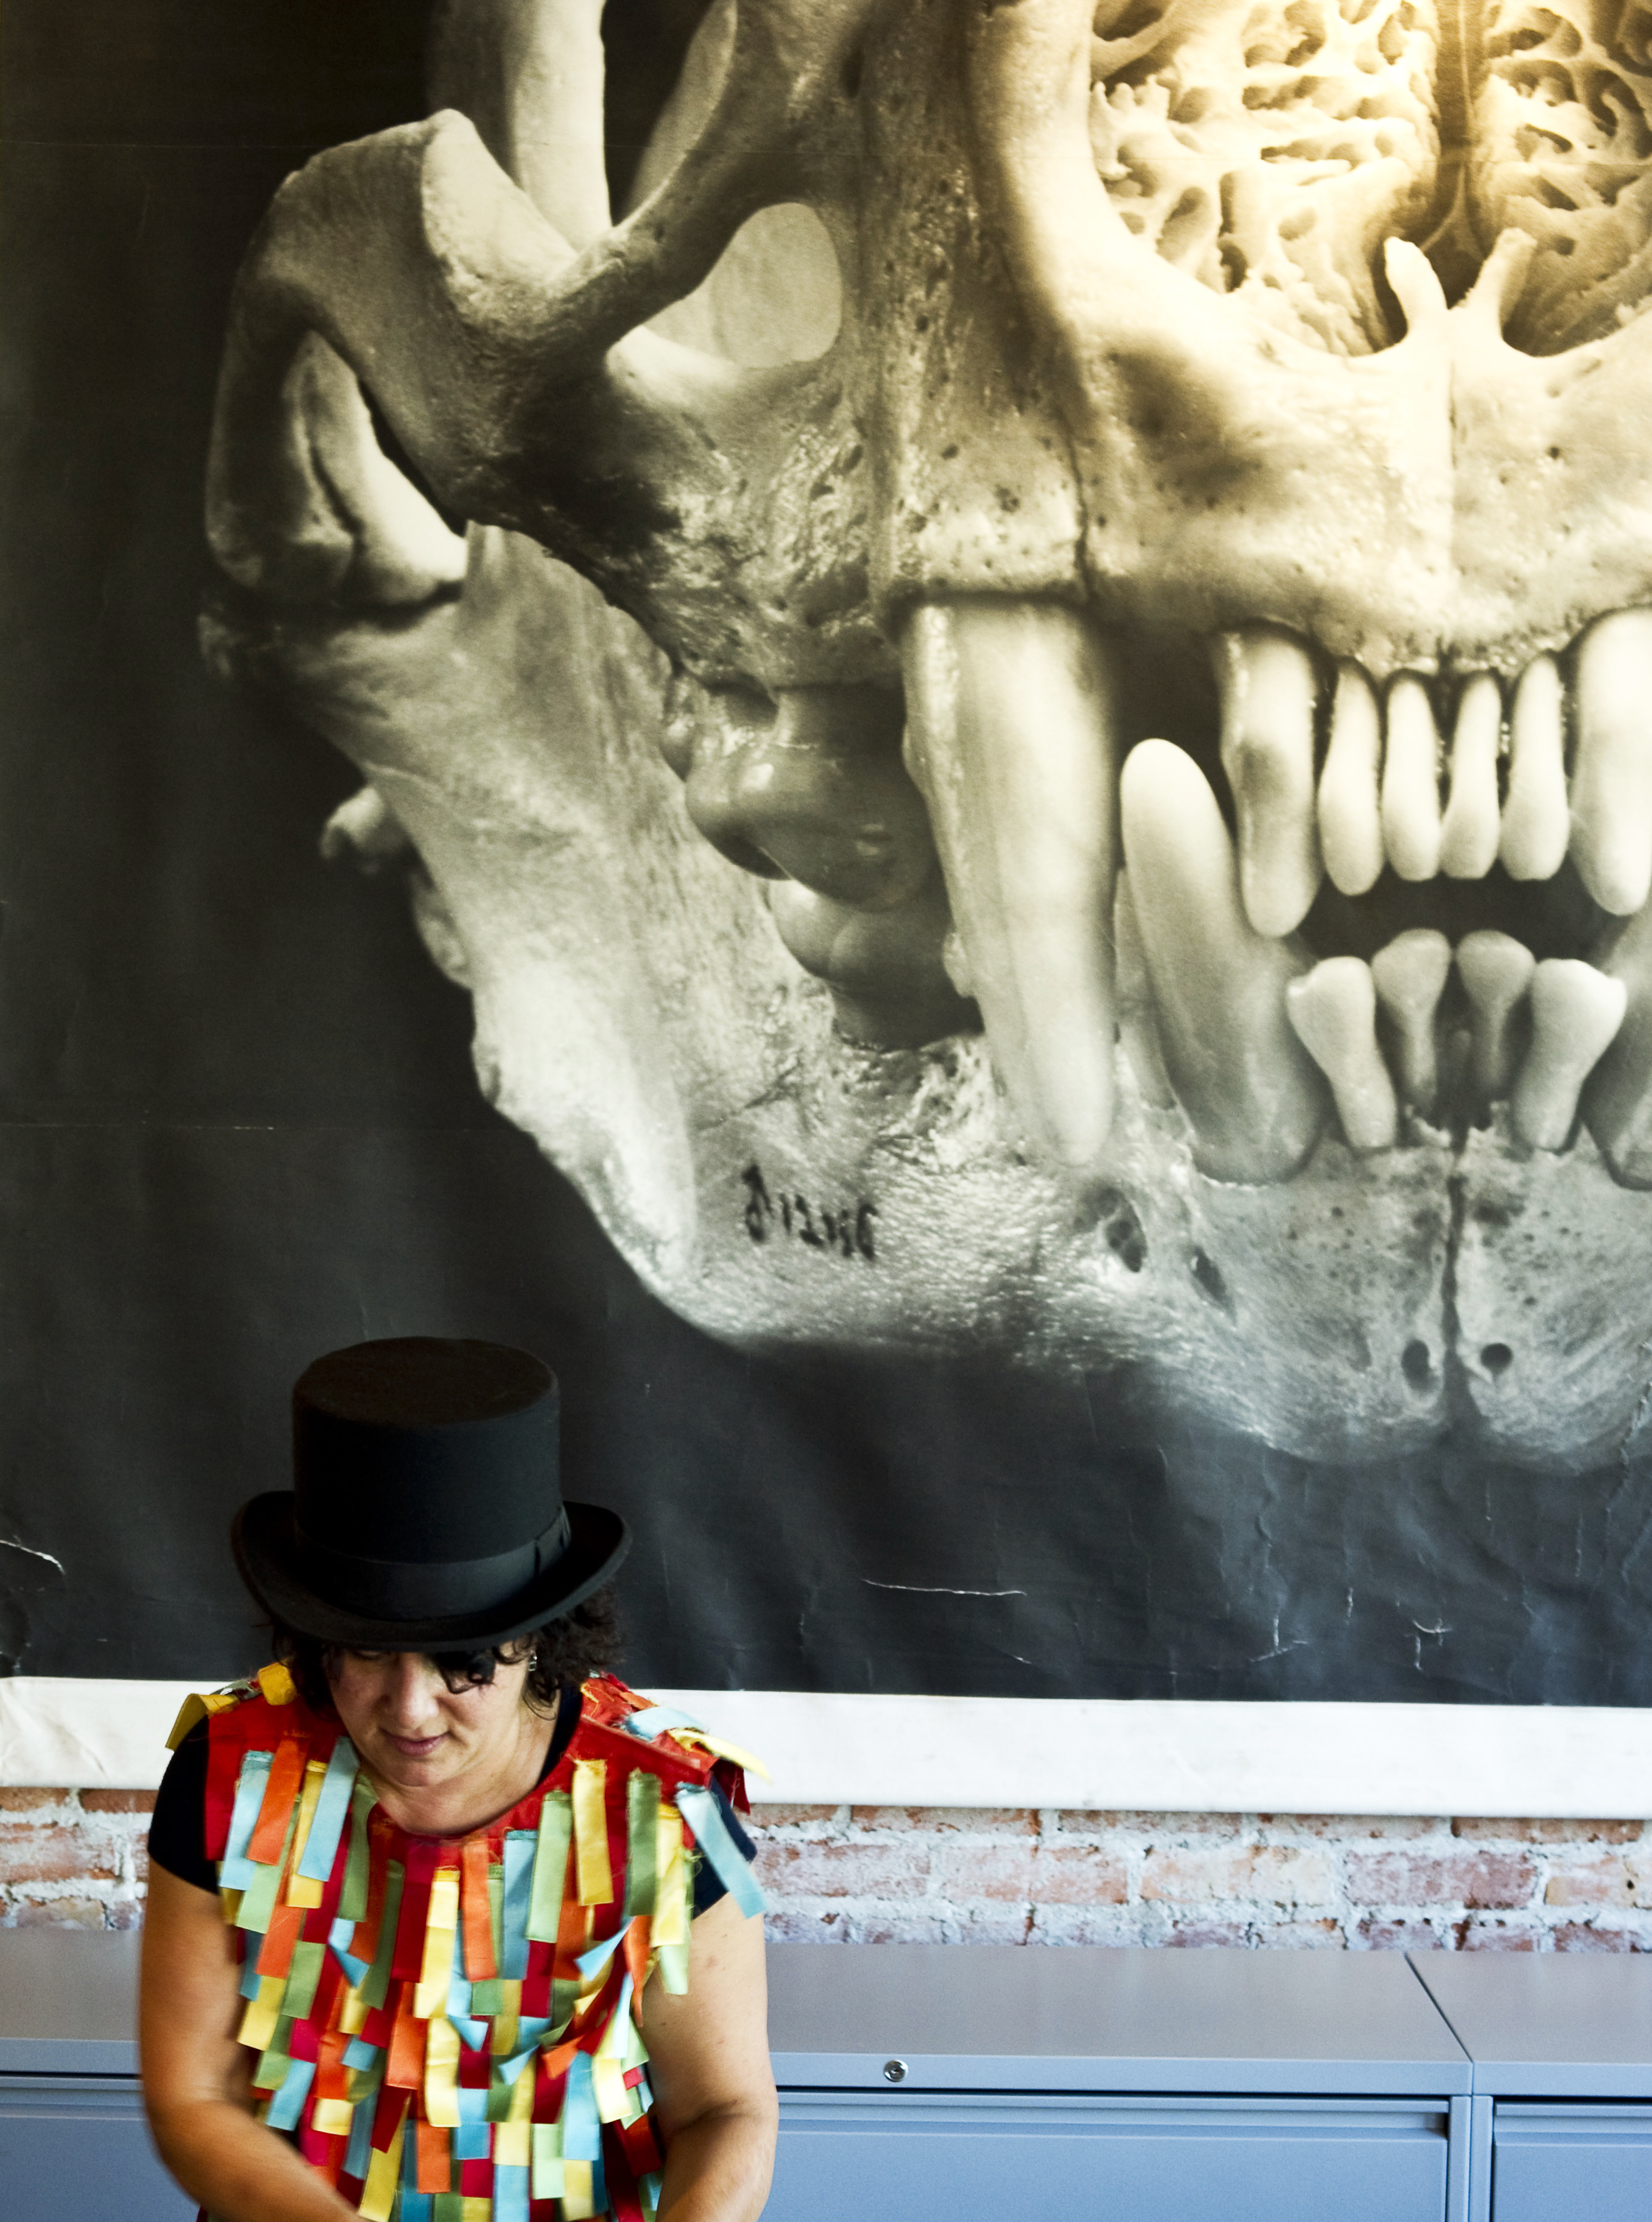 A person with a black top hat and colorful, ribbon-like attire stands in front of a large, black-and-white skull image pinned on a wall.